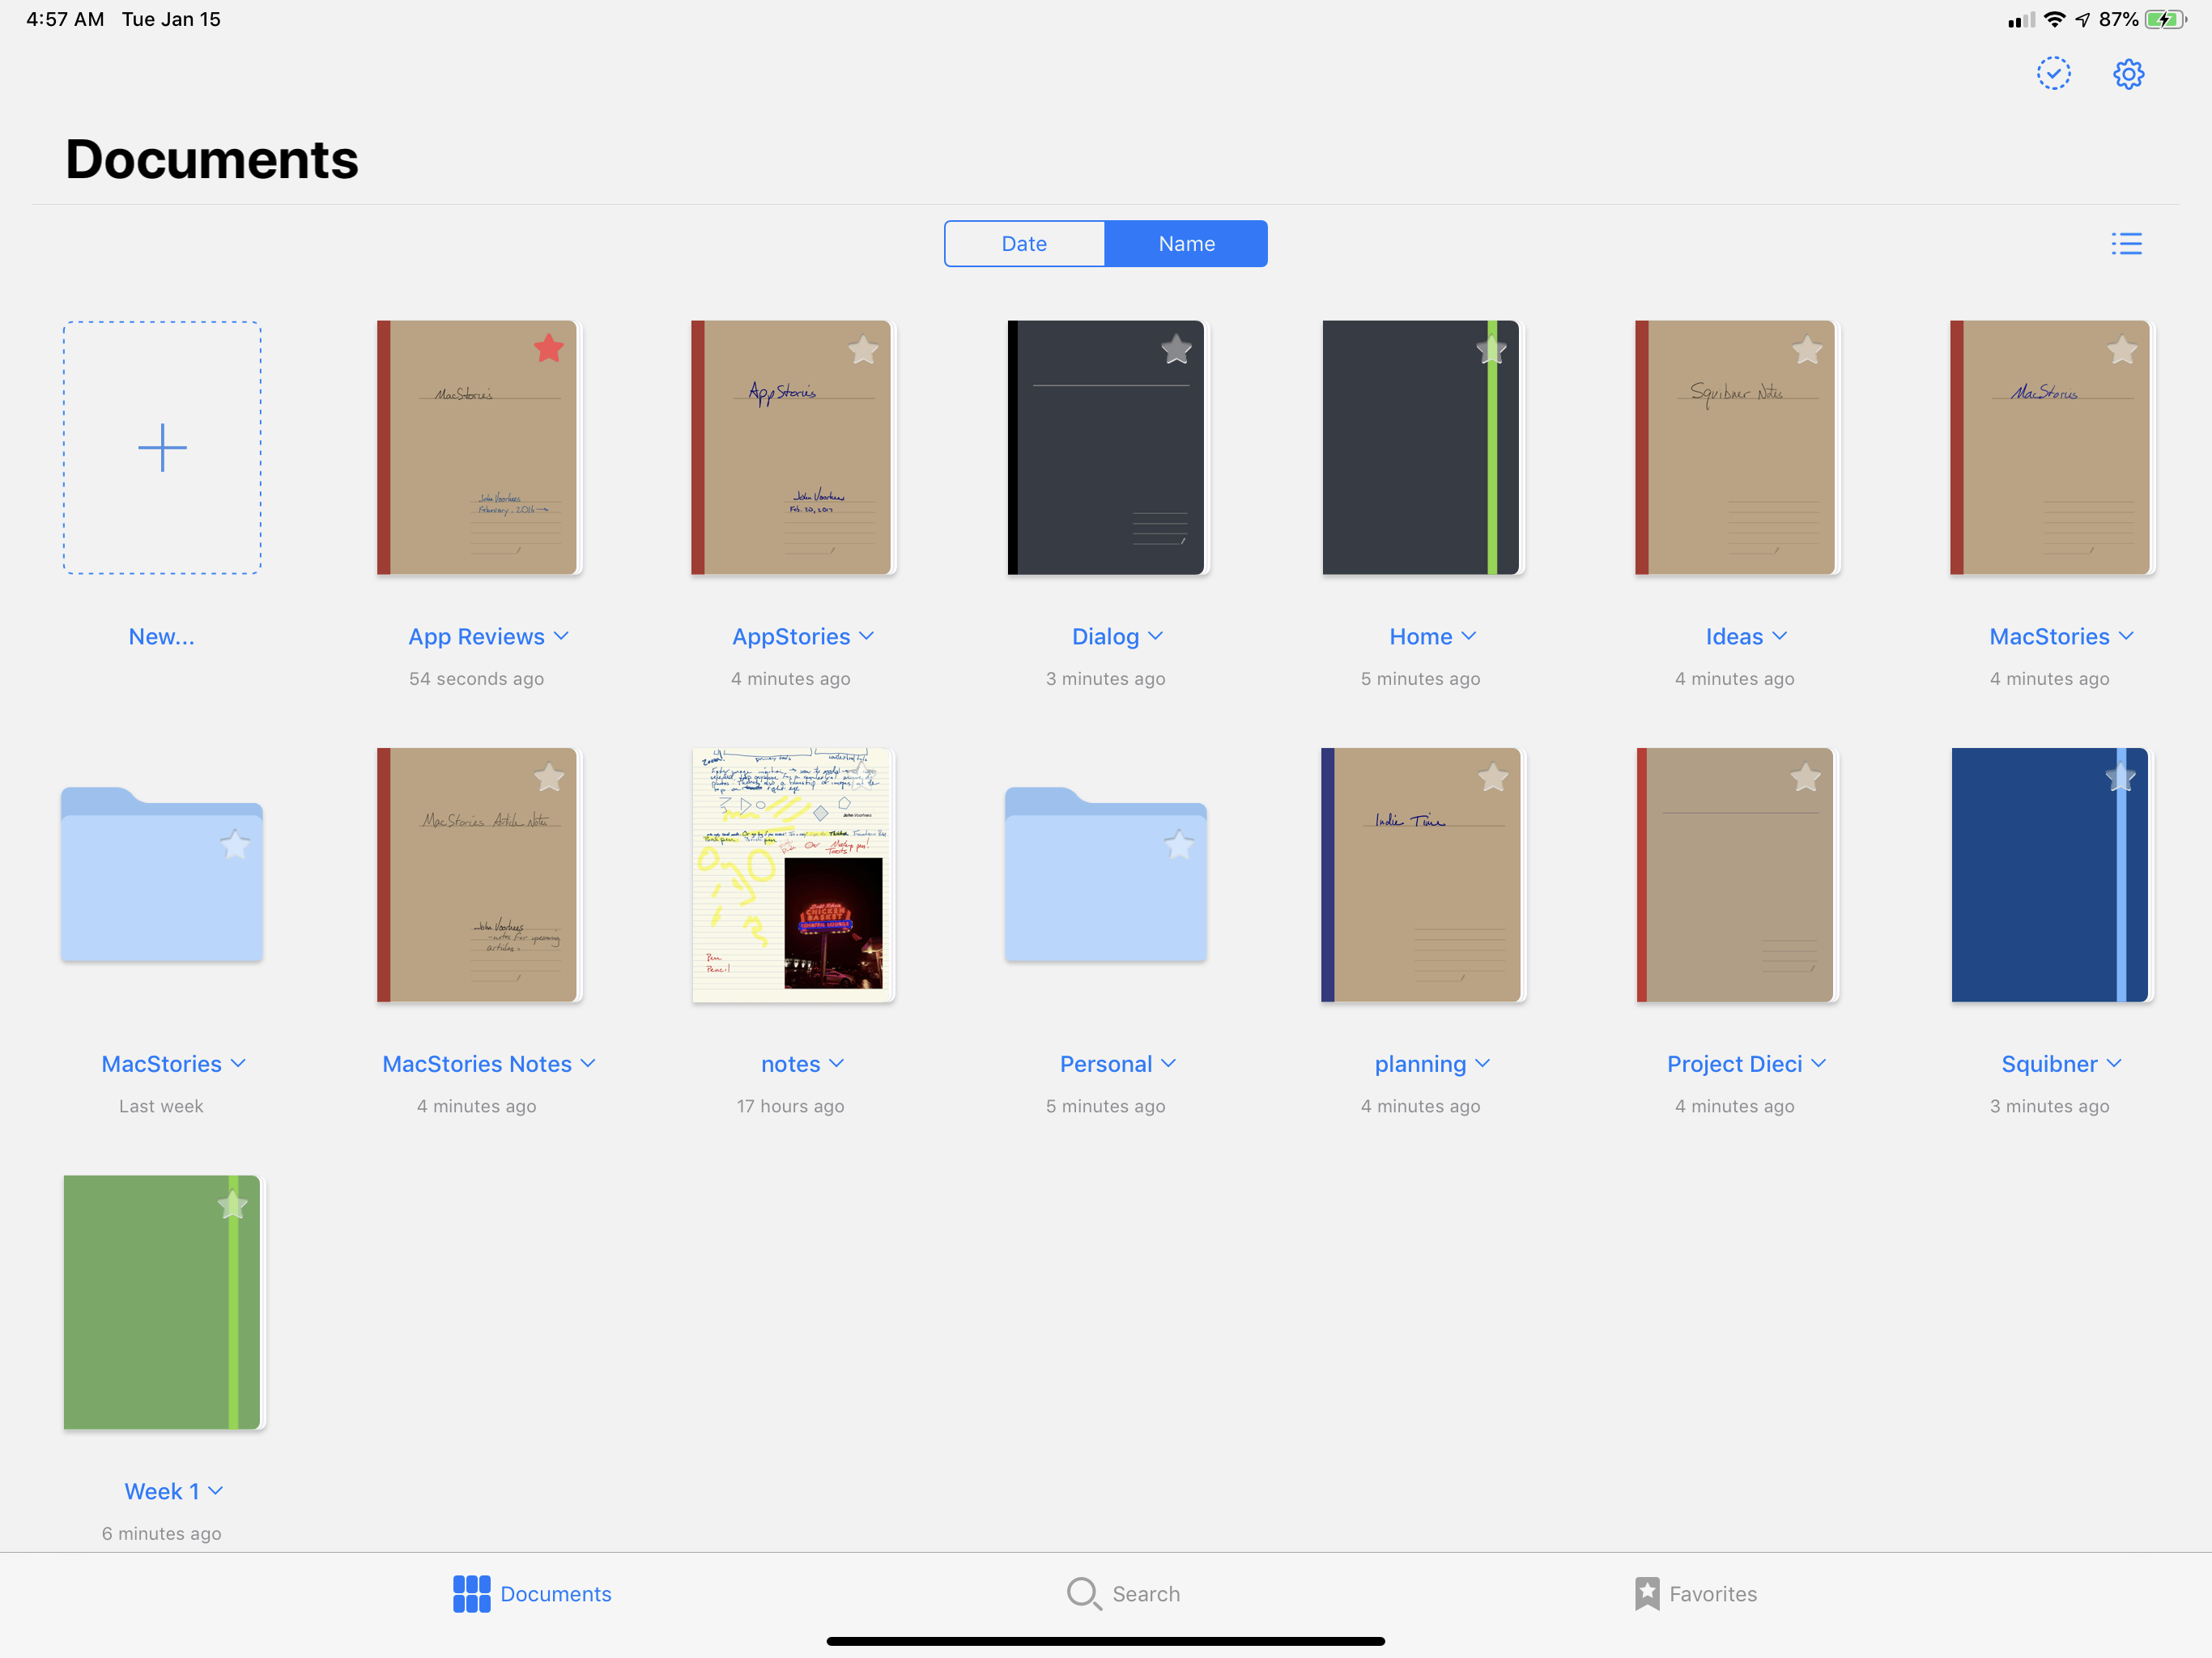 The Documents view includes notebooks, folders, and free-standing notes.